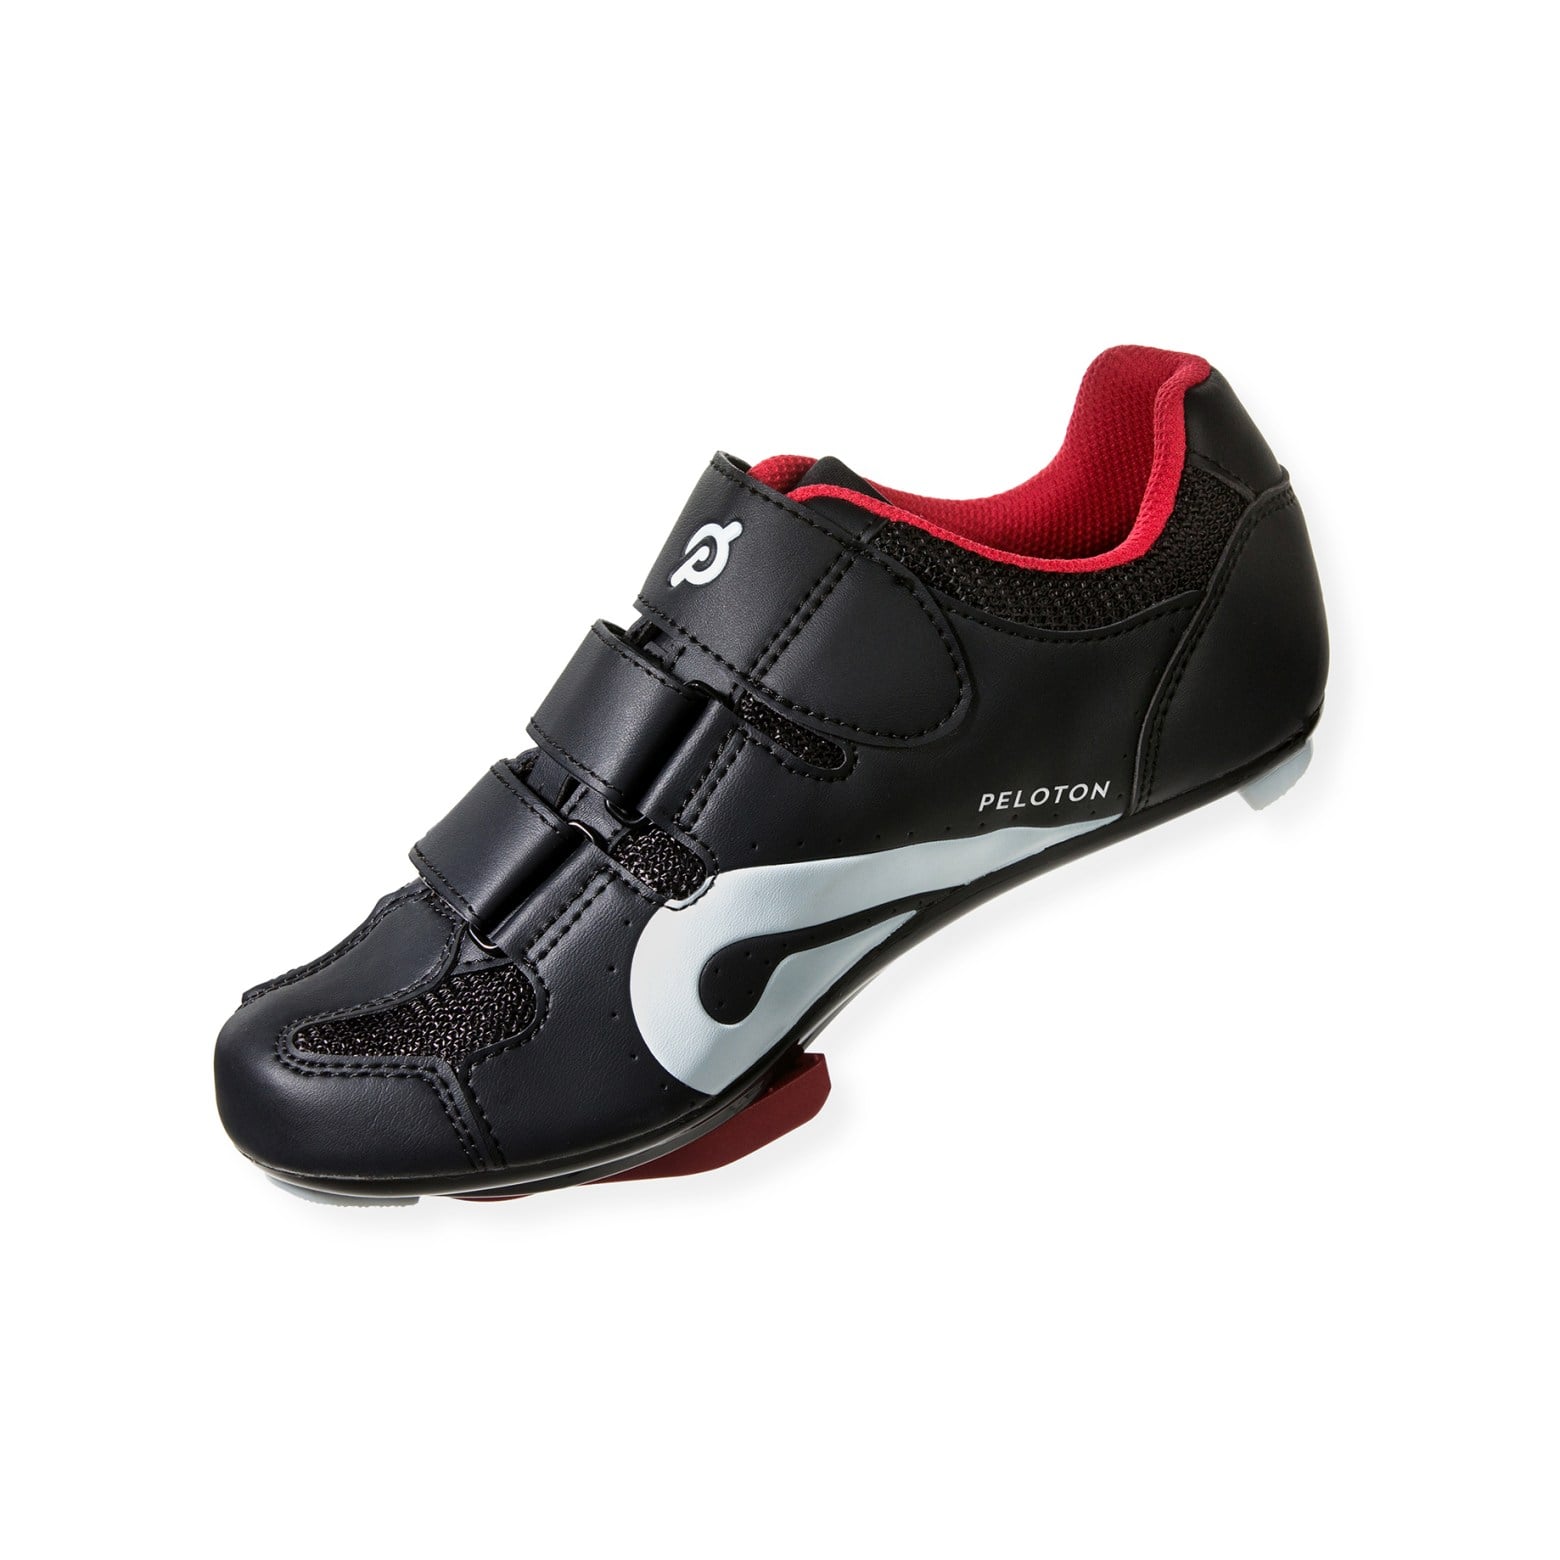 Spin Shoes Indoor Cycling Shoes for Men Lock Pedal Bike Shoes Cycling Shoes Mens Road Bike Shoes with Compatible Cleat Peloton Shoe with SPD and Delta